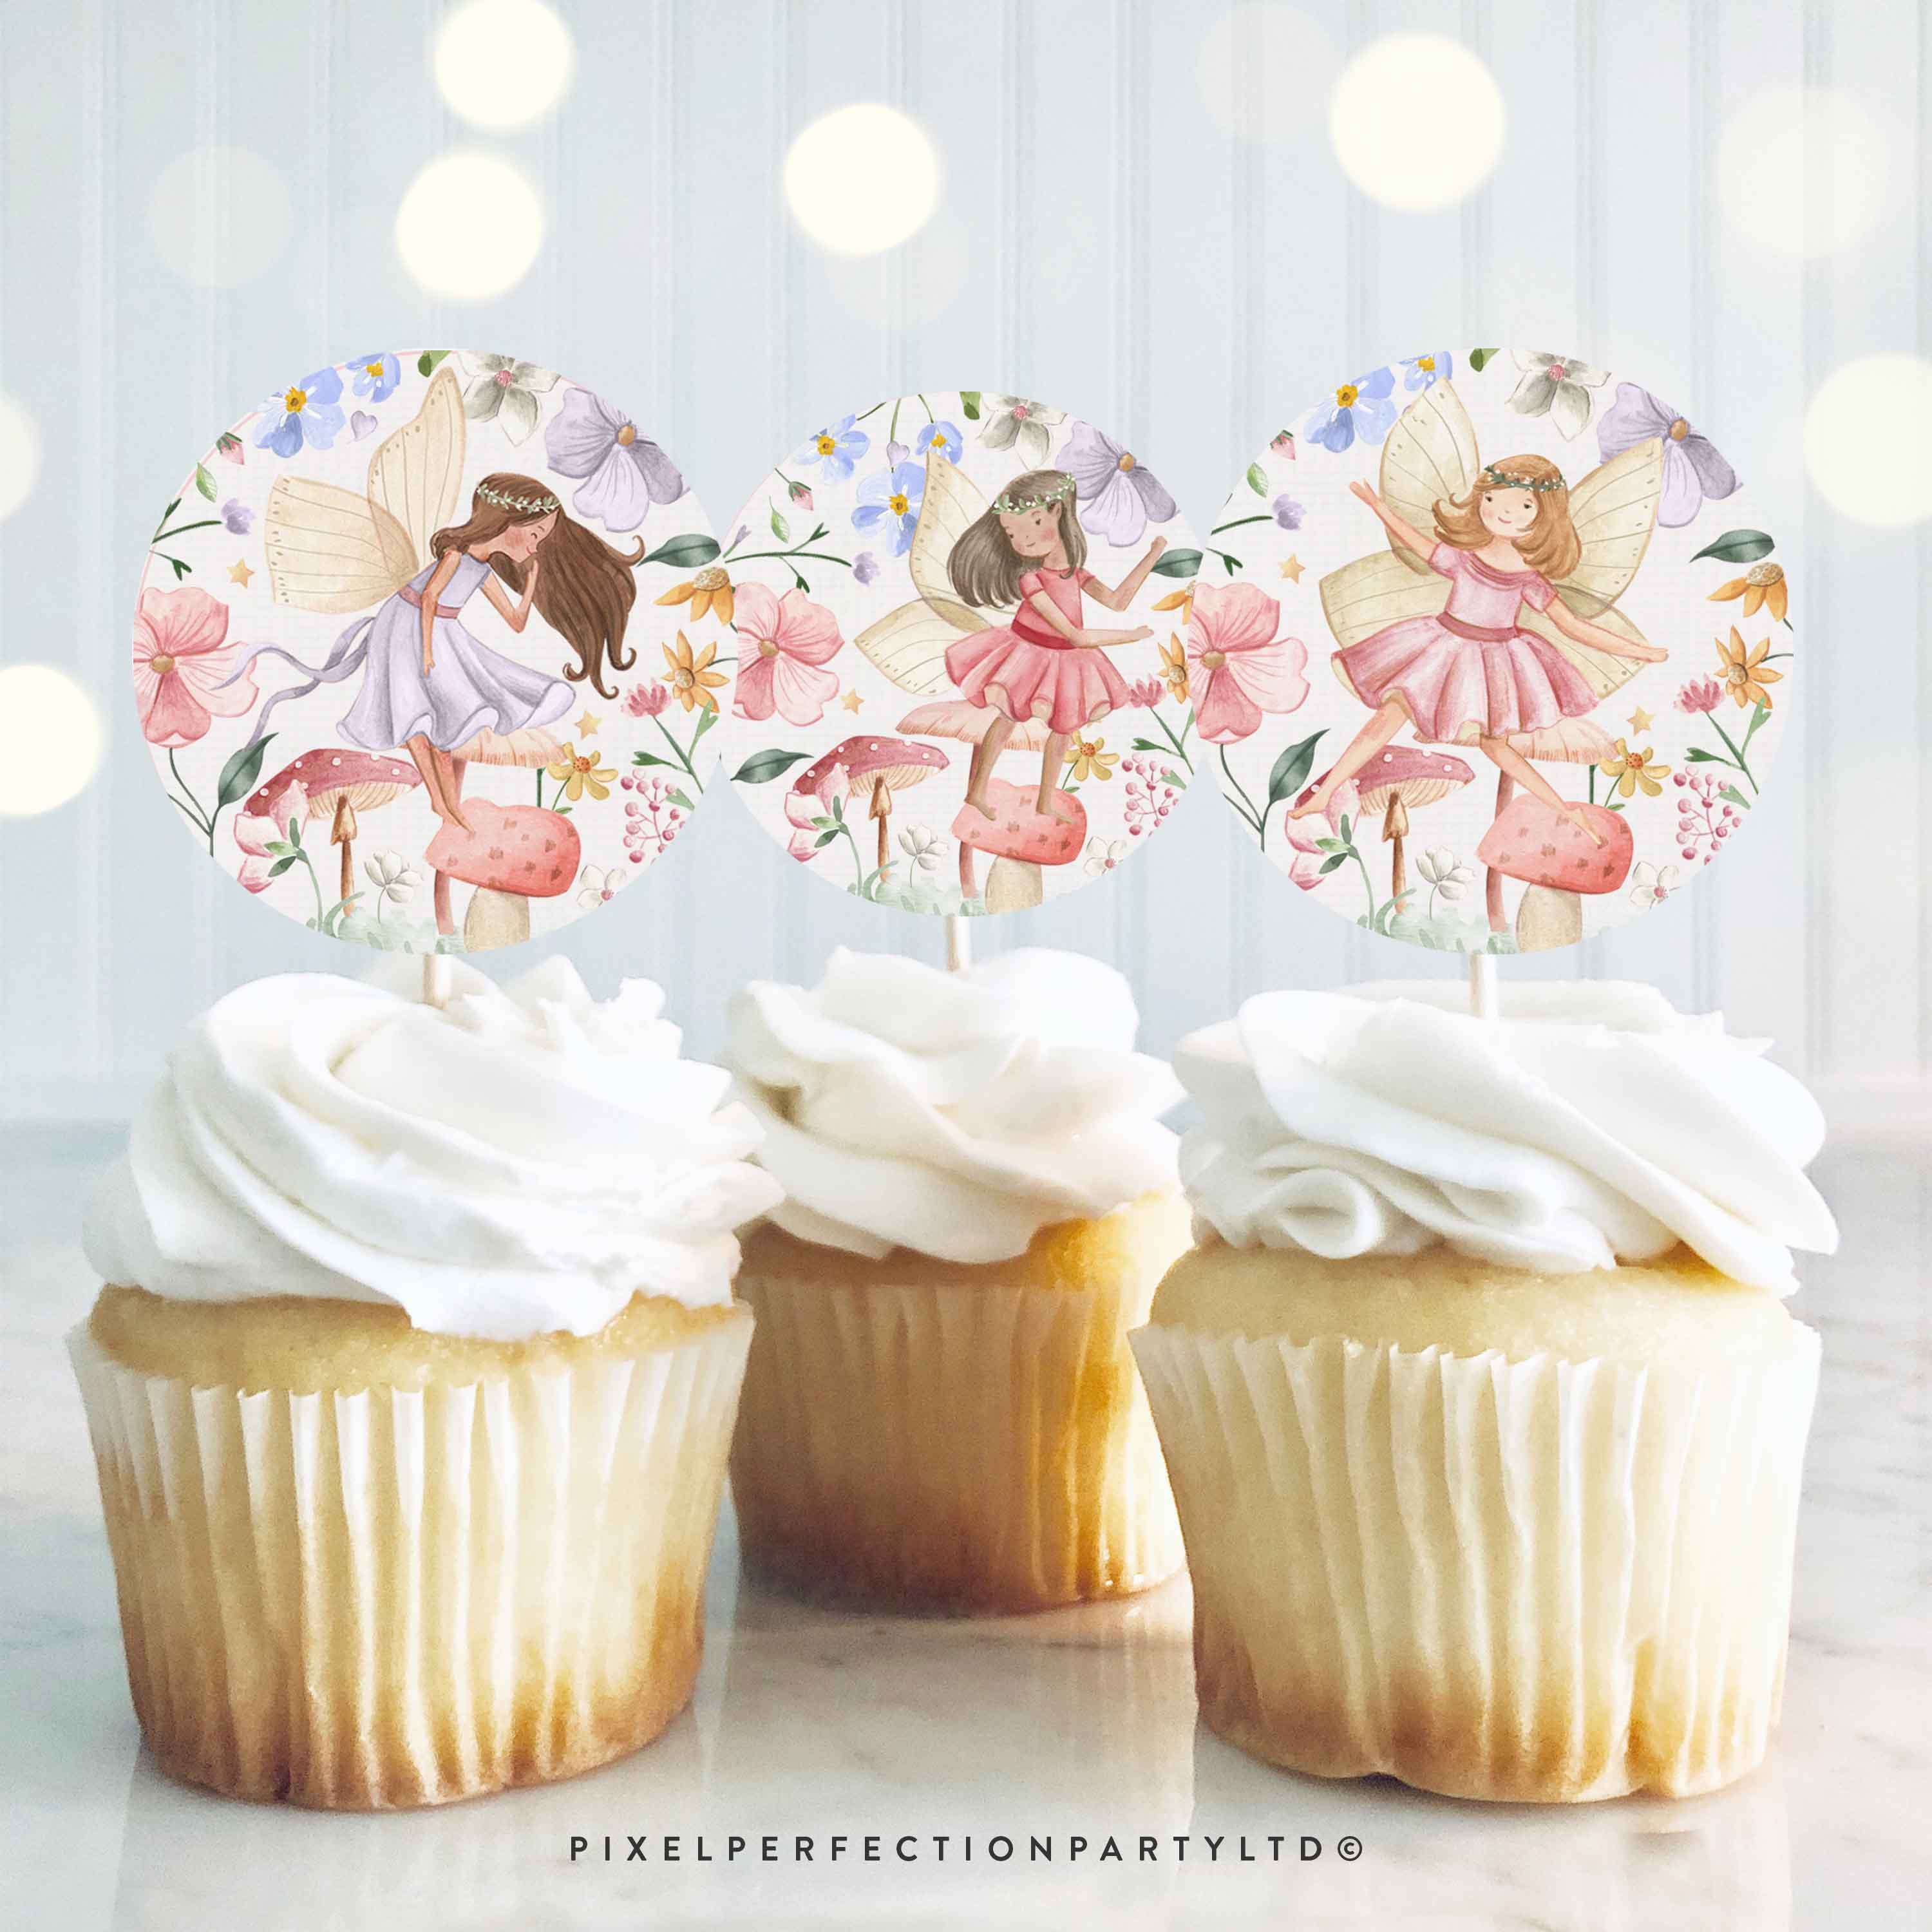 Knitting Edible Cupcake Toppers - Stand-up Fairy Cake Decorations / Birthday